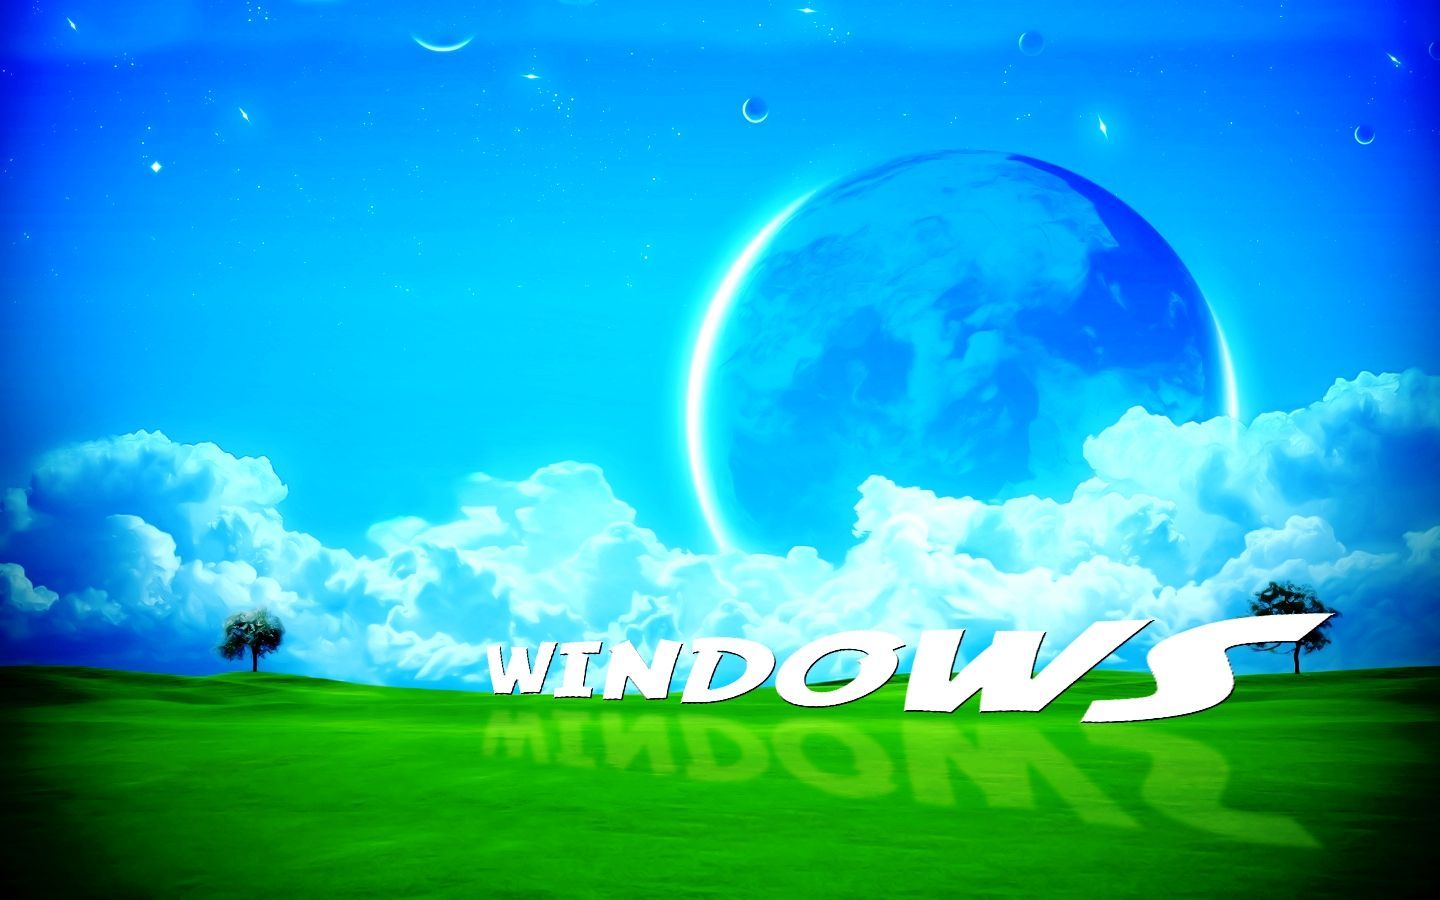 Download Free Animated Desktop Backgrounds For Xp Now: Animated by ...